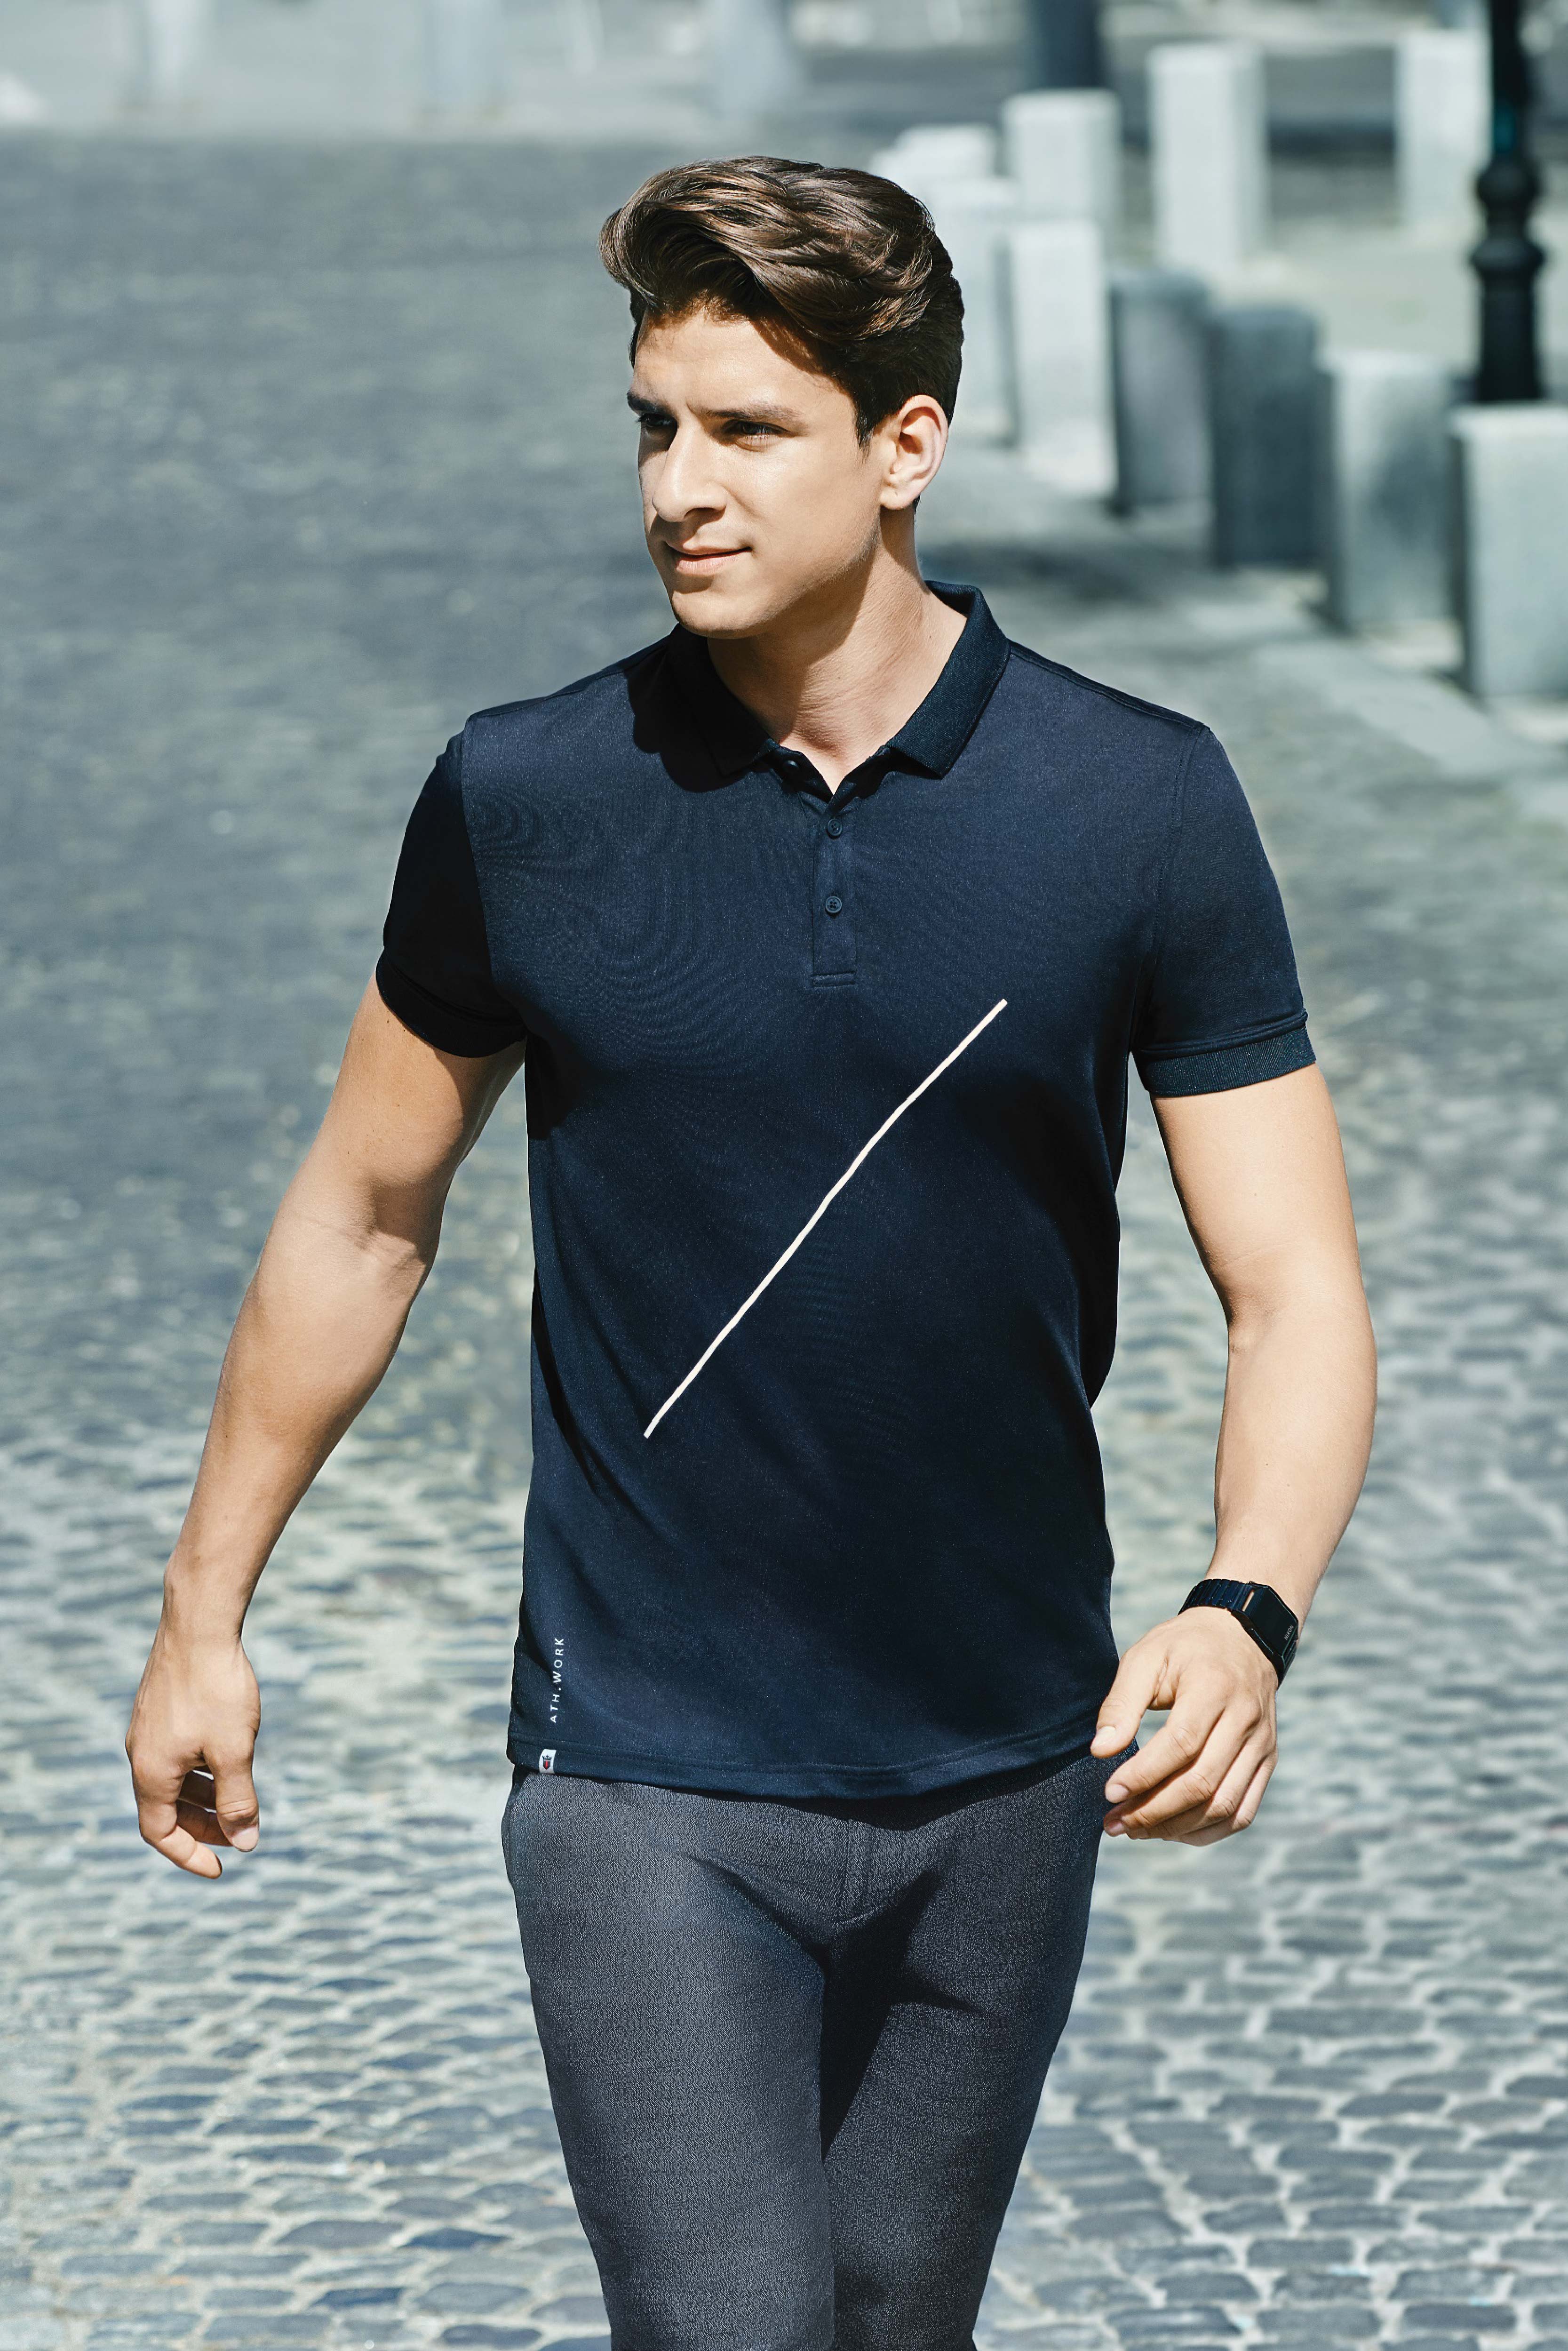 https://www.louisphilippe.com/blog/wp-content/uploads/2022/07/Select-The-Best-From-This-Stellar-Range-Of-Mens-T-shirts-Louis-Philippe-Fashion-Blogs.jpg